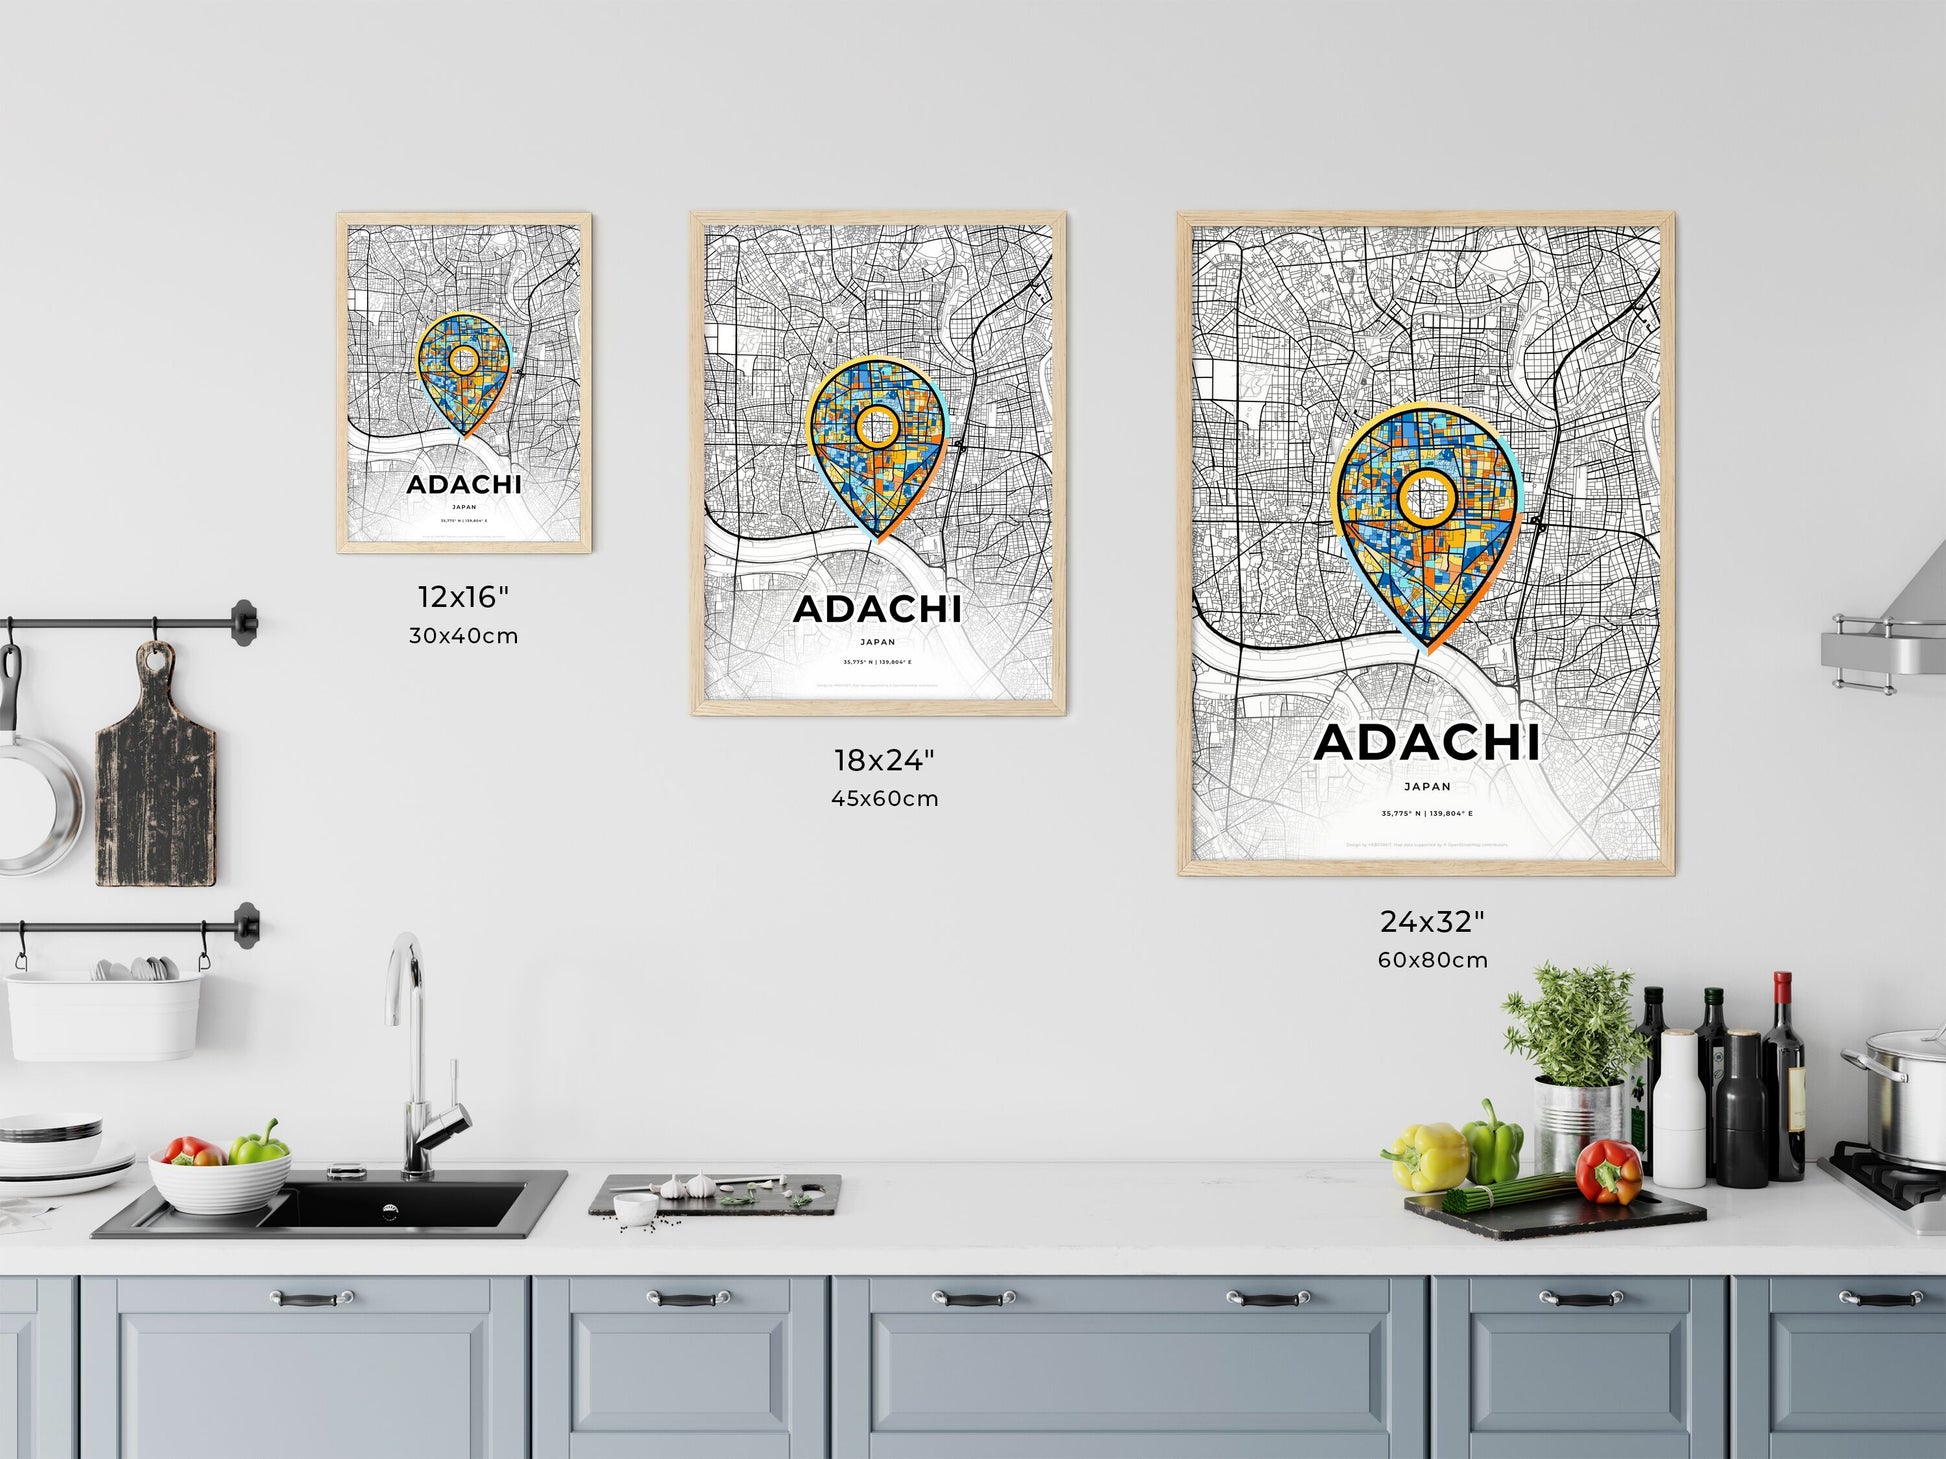 ADACHI JAPAN minimal art map with a colorful icon. Where it all began, Couple map gift.